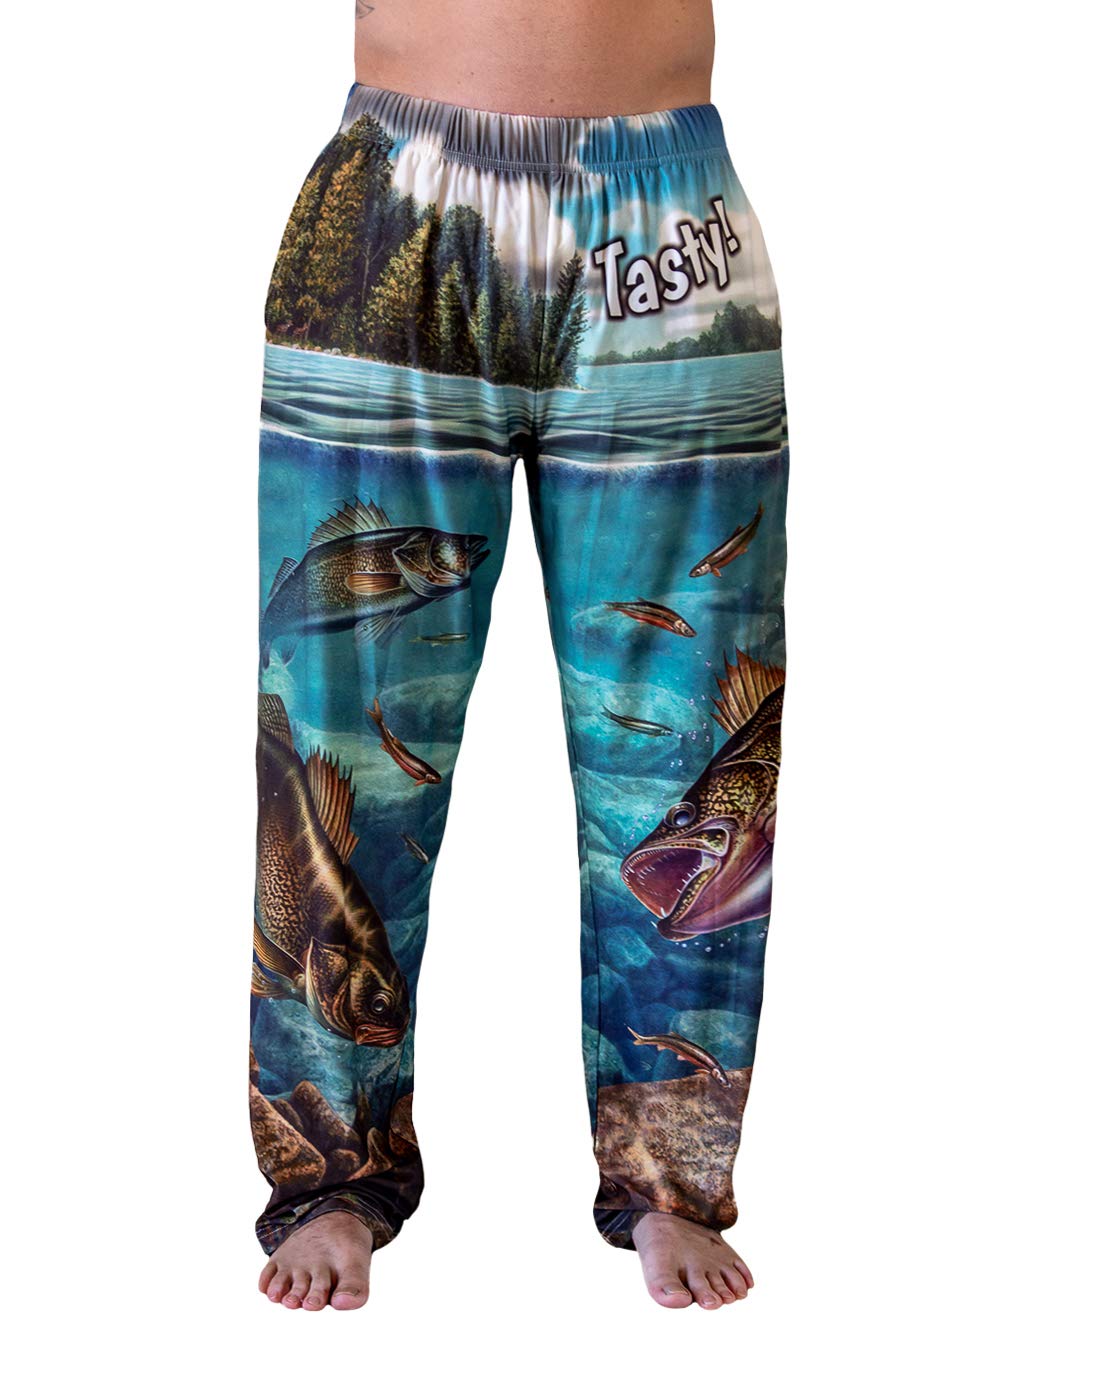 Waist down photo of model wearing Walleye, Tasty!  pajama lounge pants front view (white background)